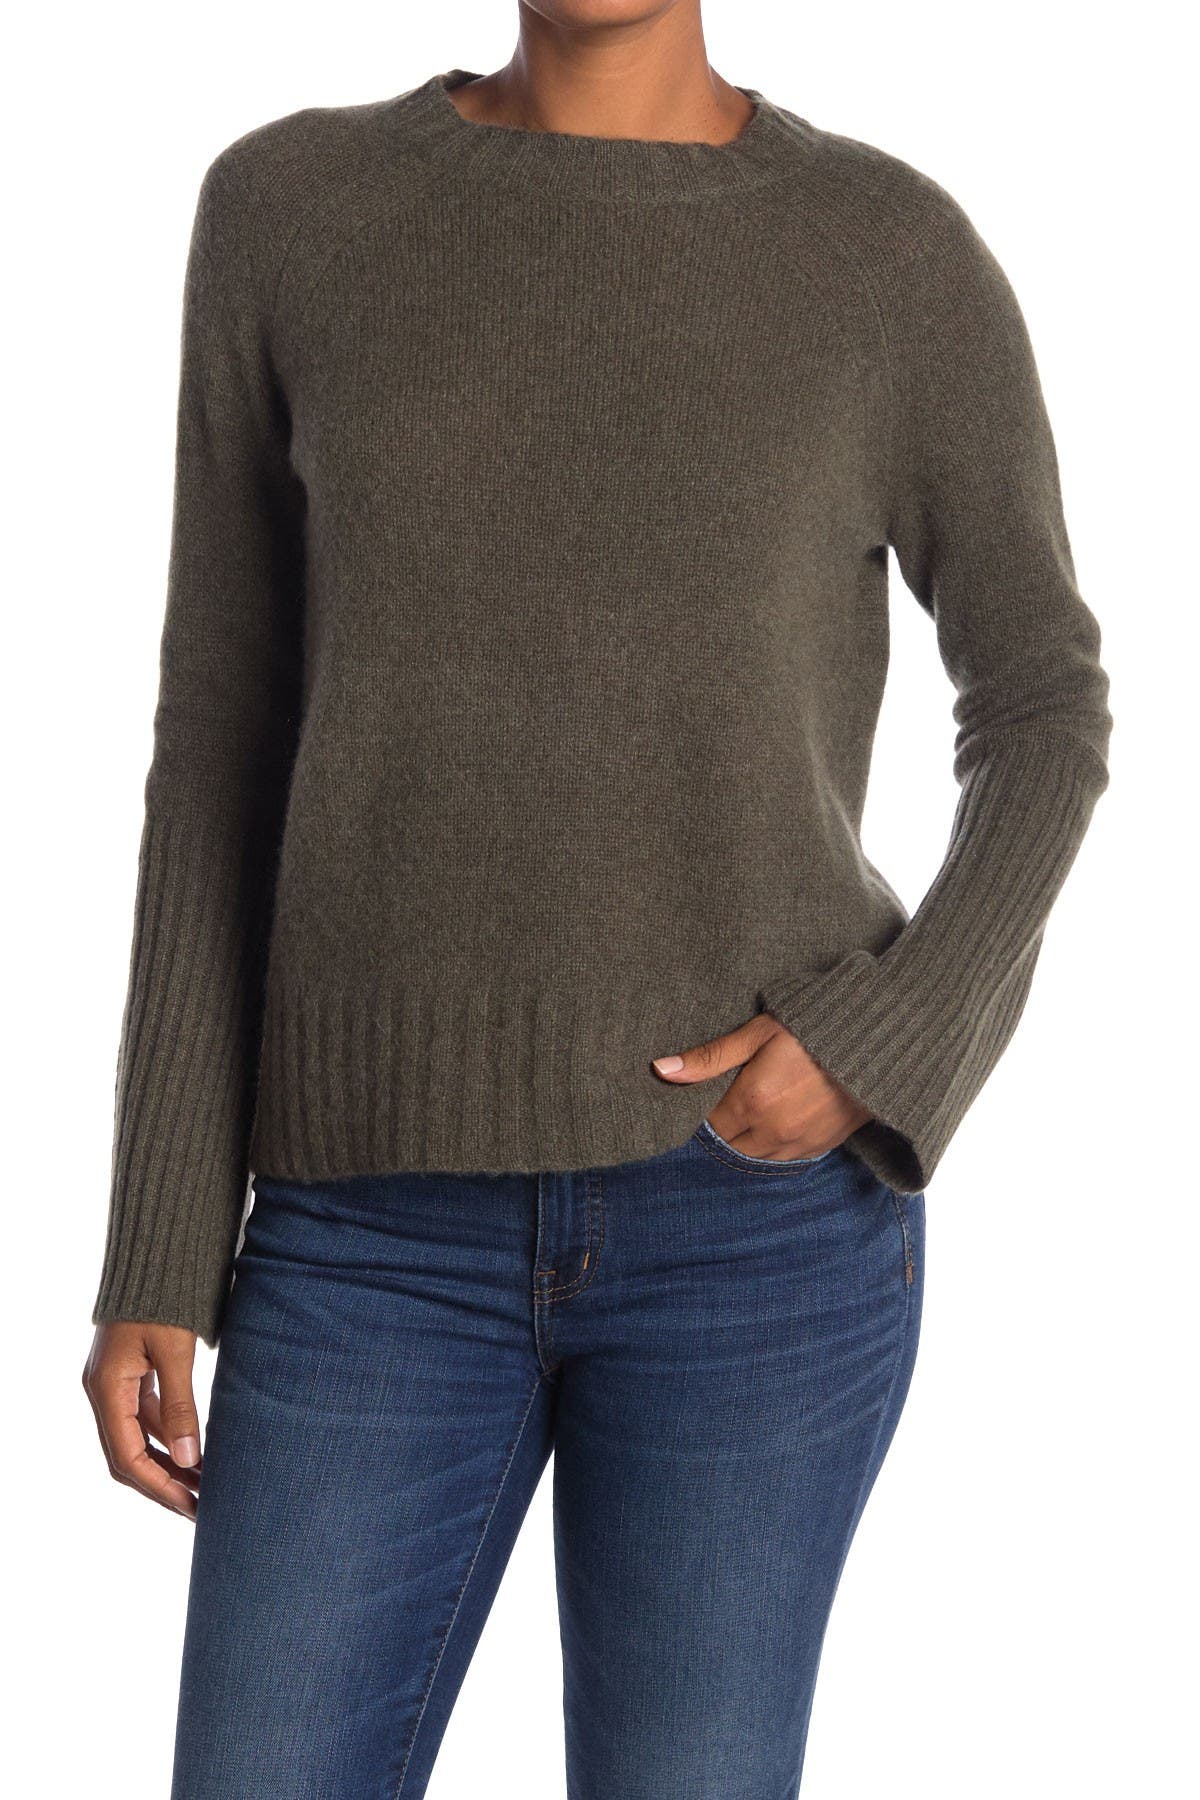 360 Cashmere | Maikee Cashmere High/Low Sweater | Nordstrom Rack